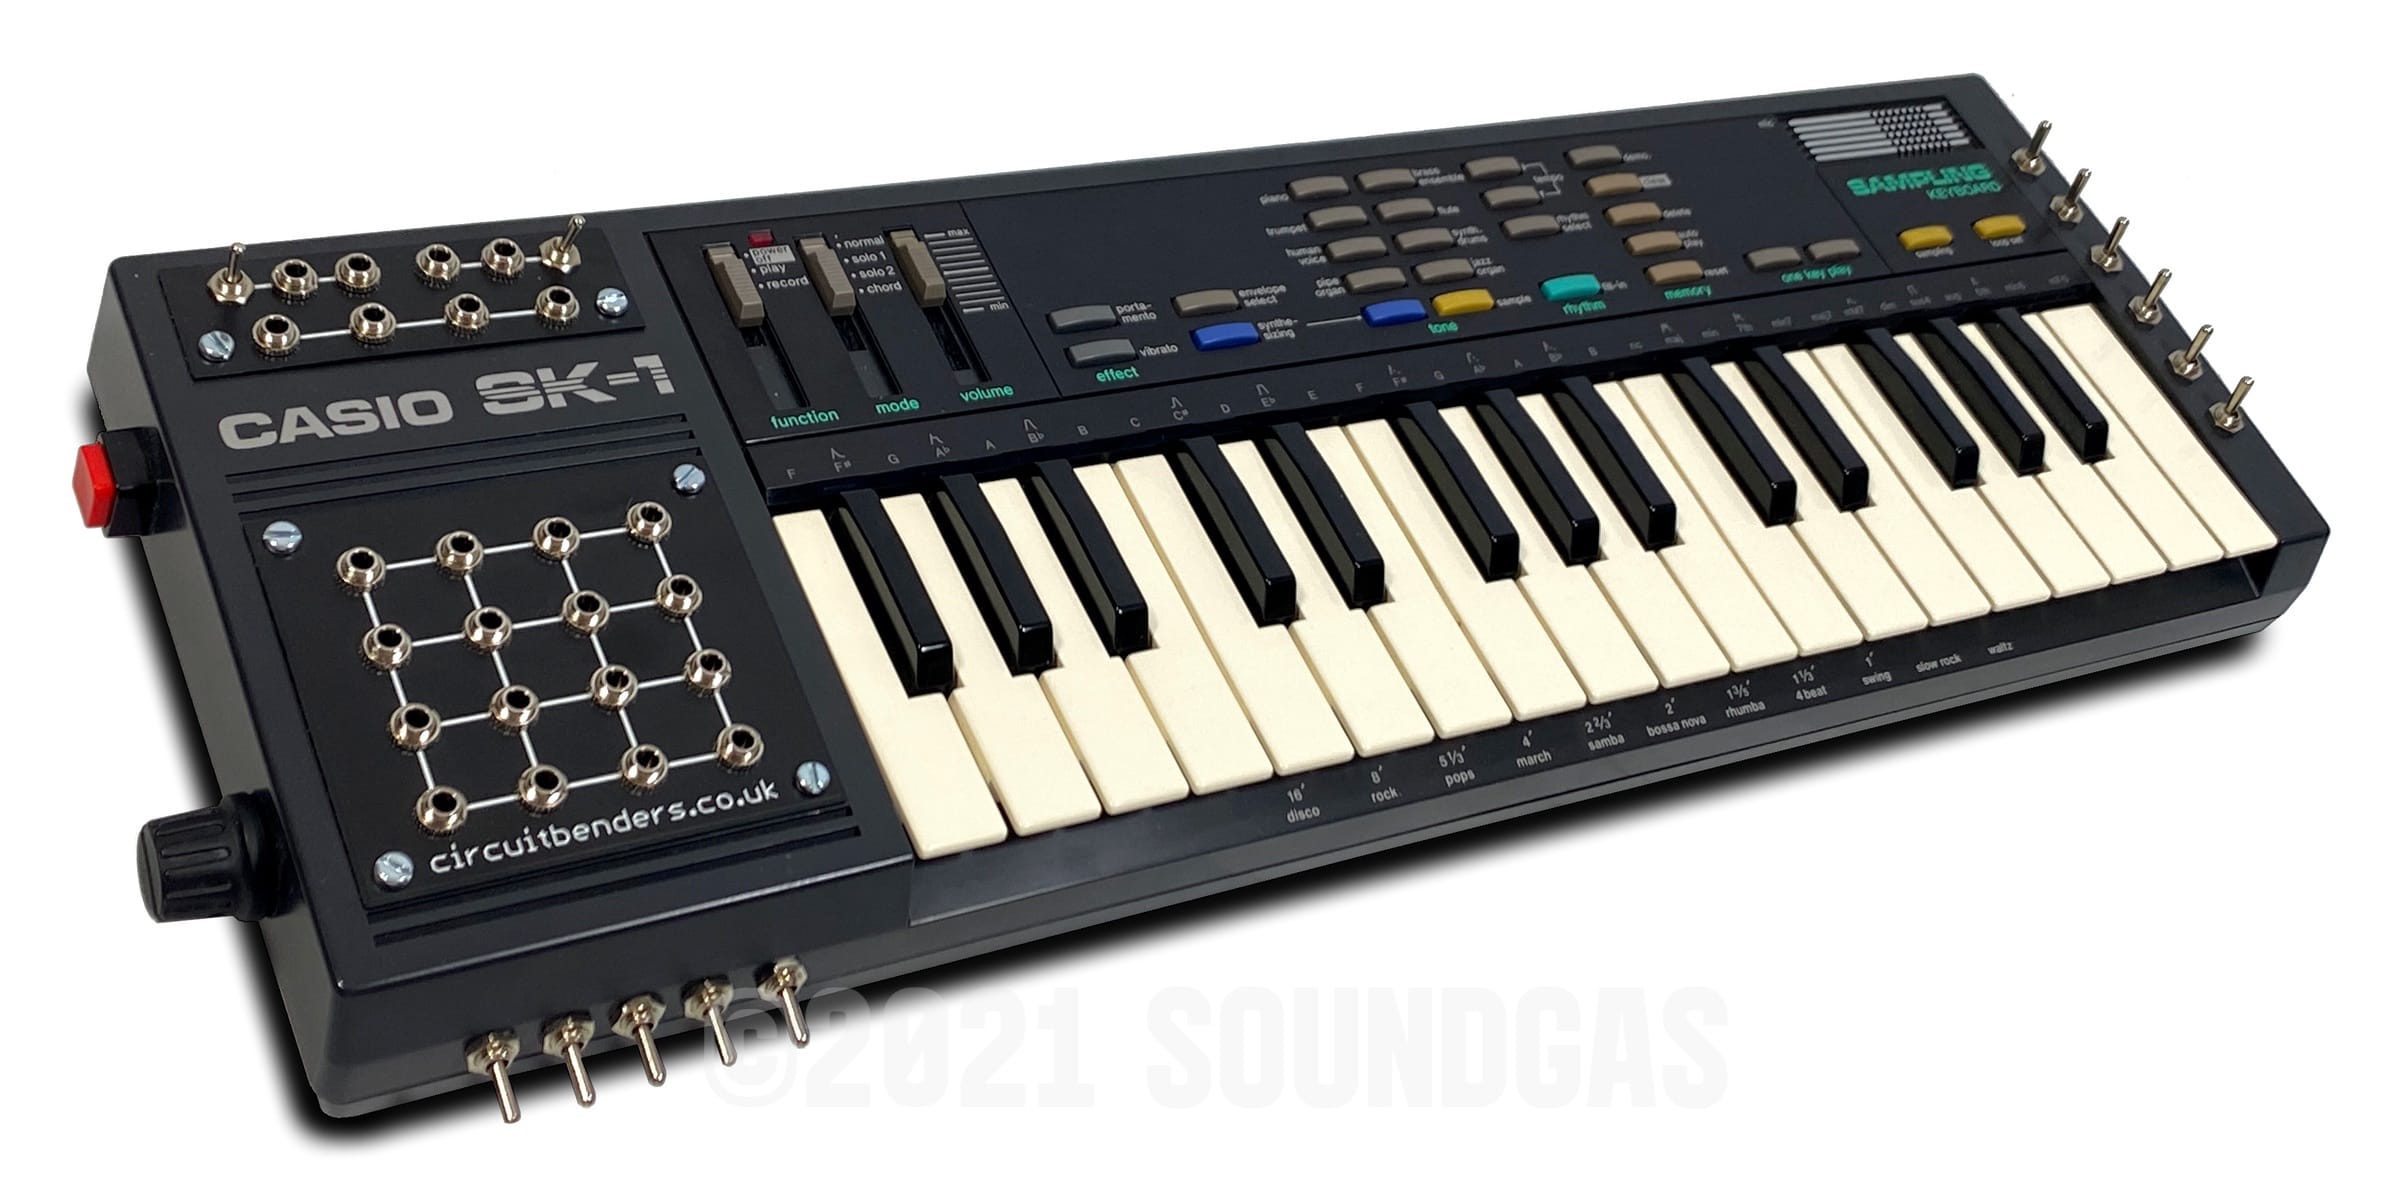 Casio SK-1 Sampling Keyboard Circuitbent - Serviced FOR SALE 